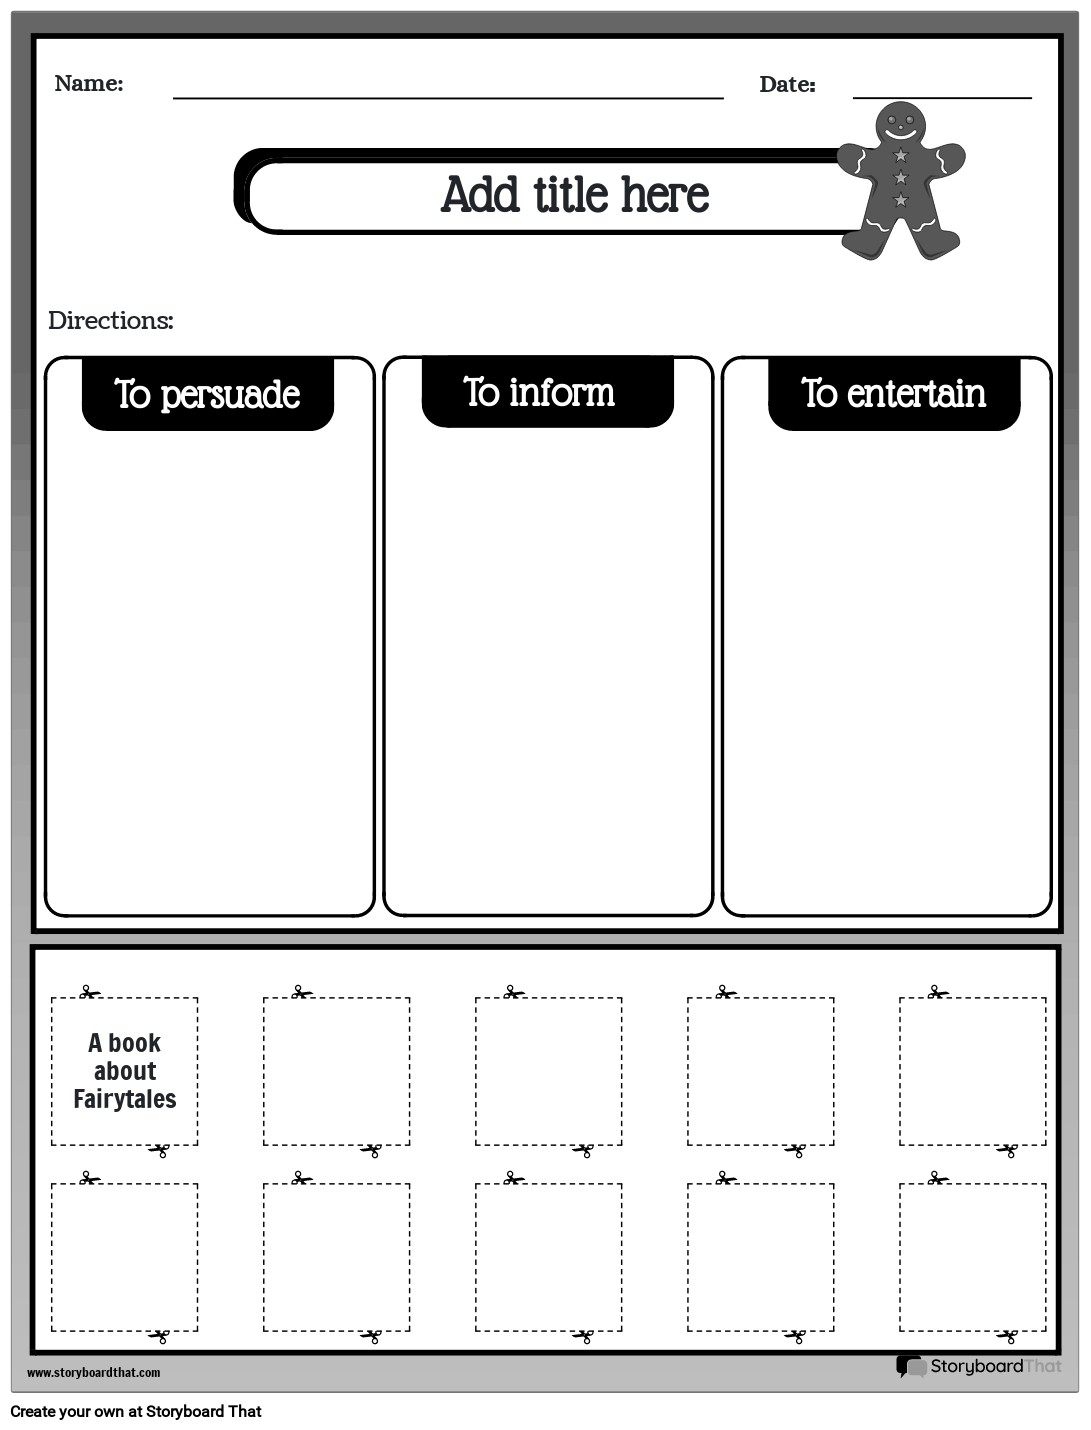 Cut-out - Author's Purpose Worksheet